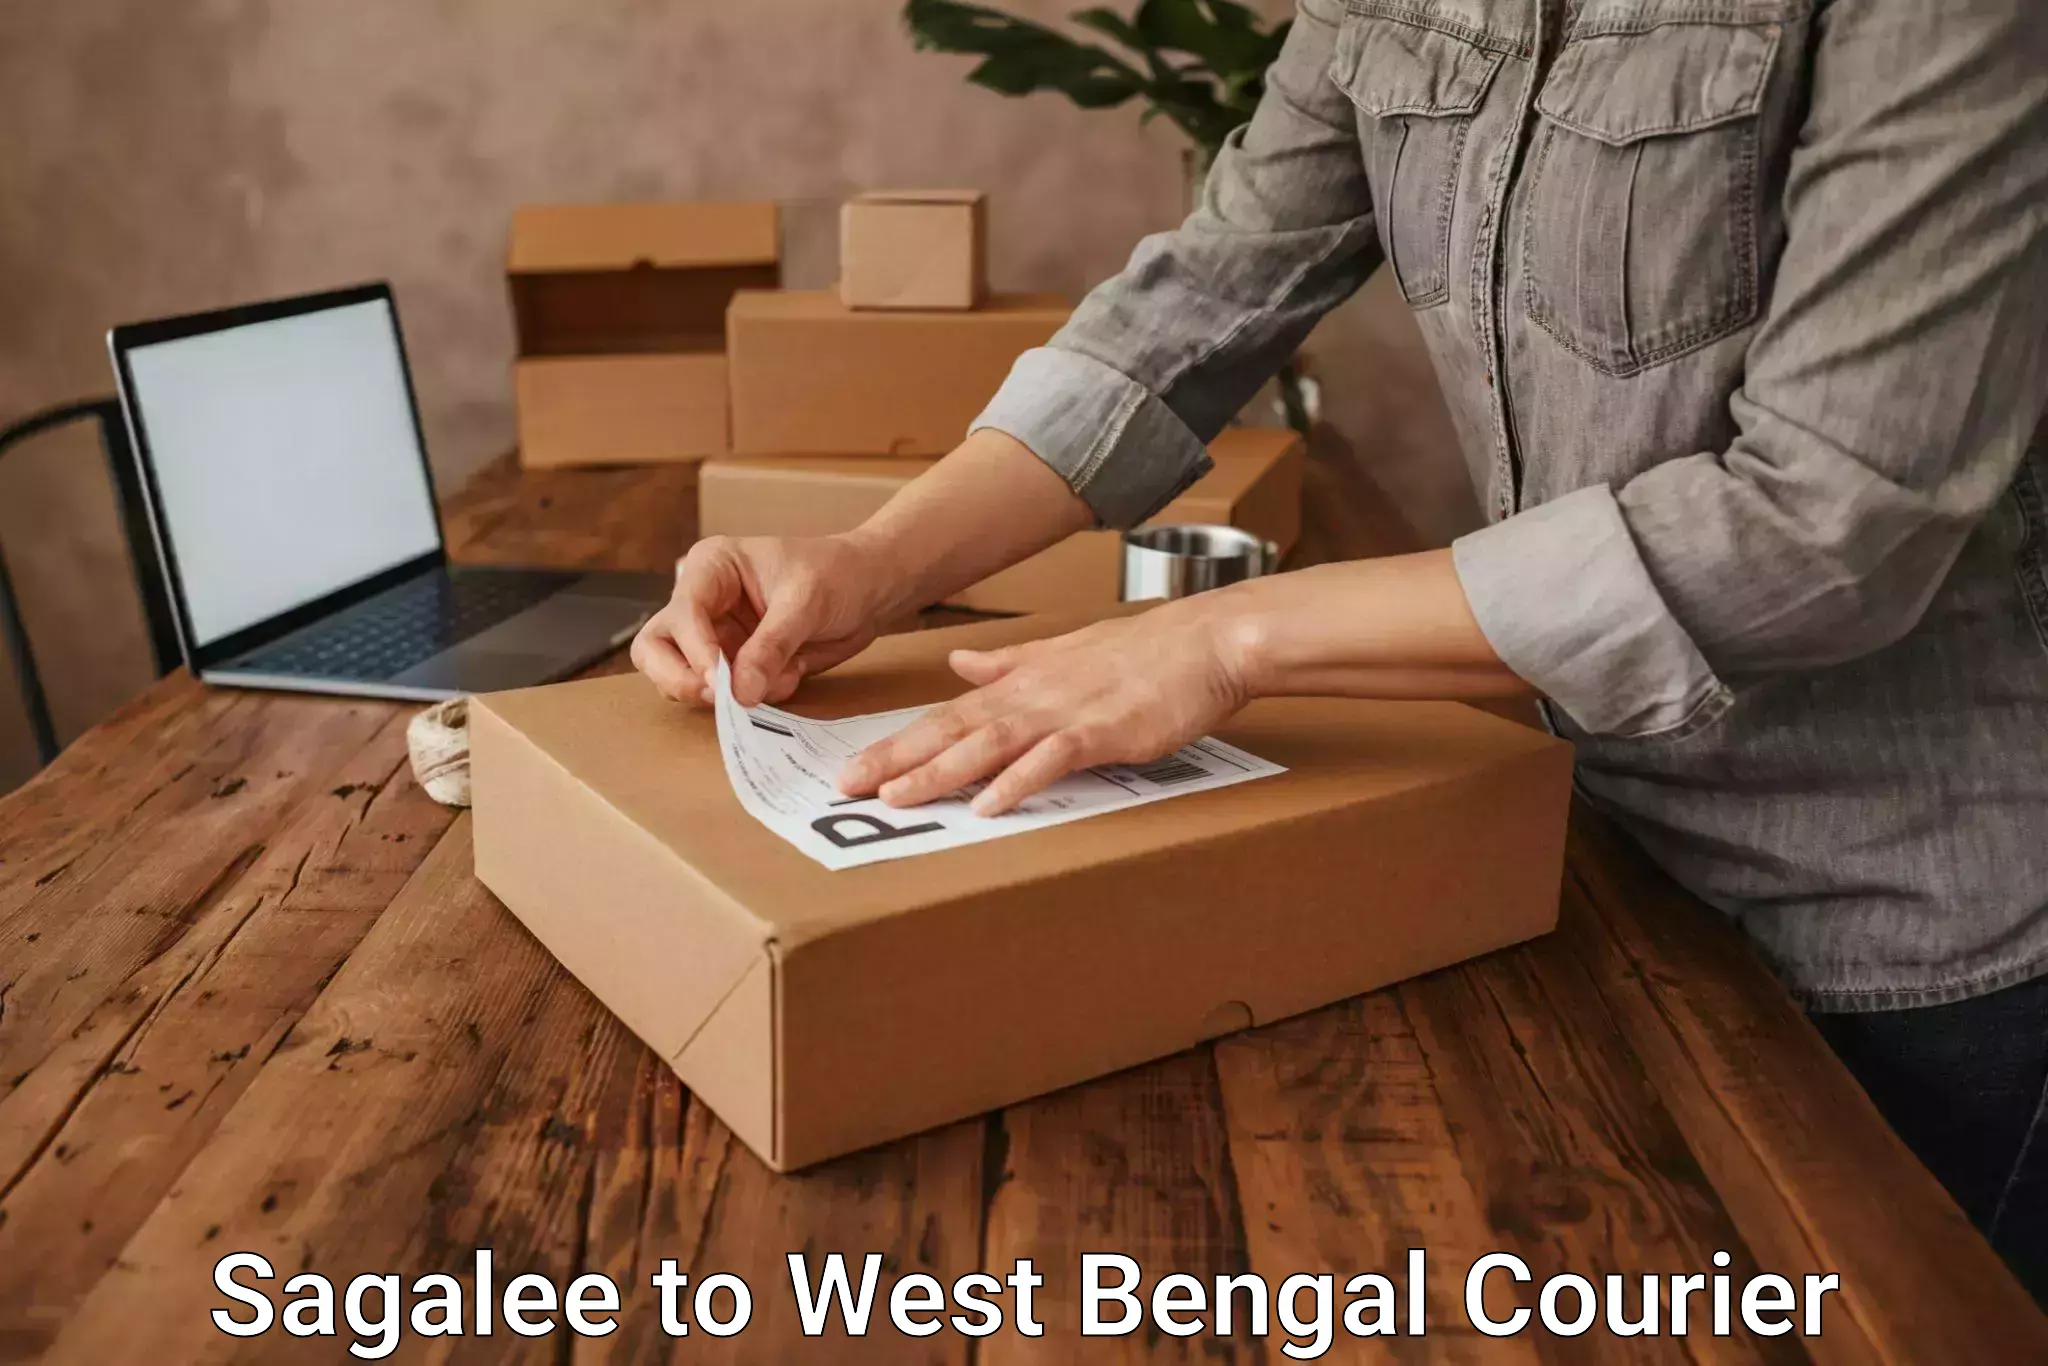 Cash on delivery service Sagalee to West Bengal